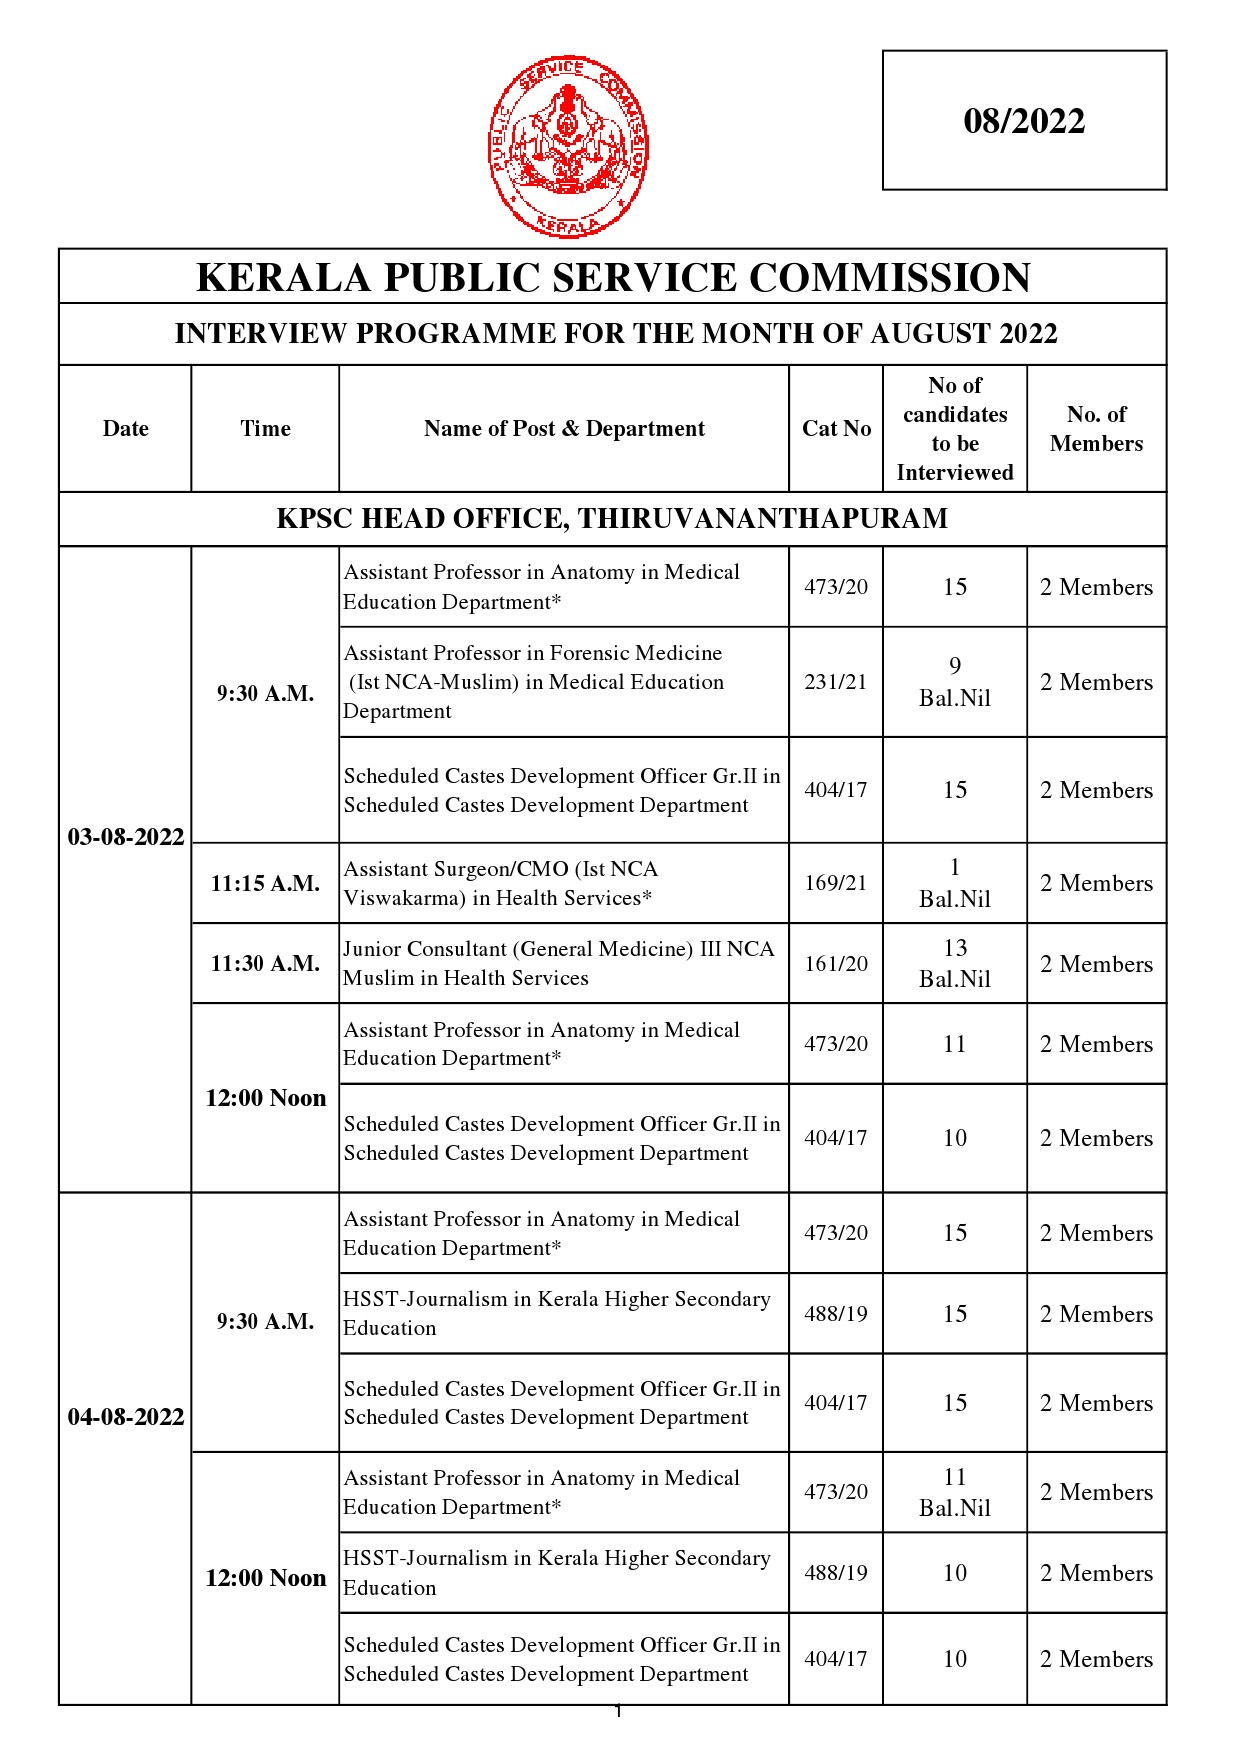 Interview Programme For The Month Of August 2022 - Notification Image 1